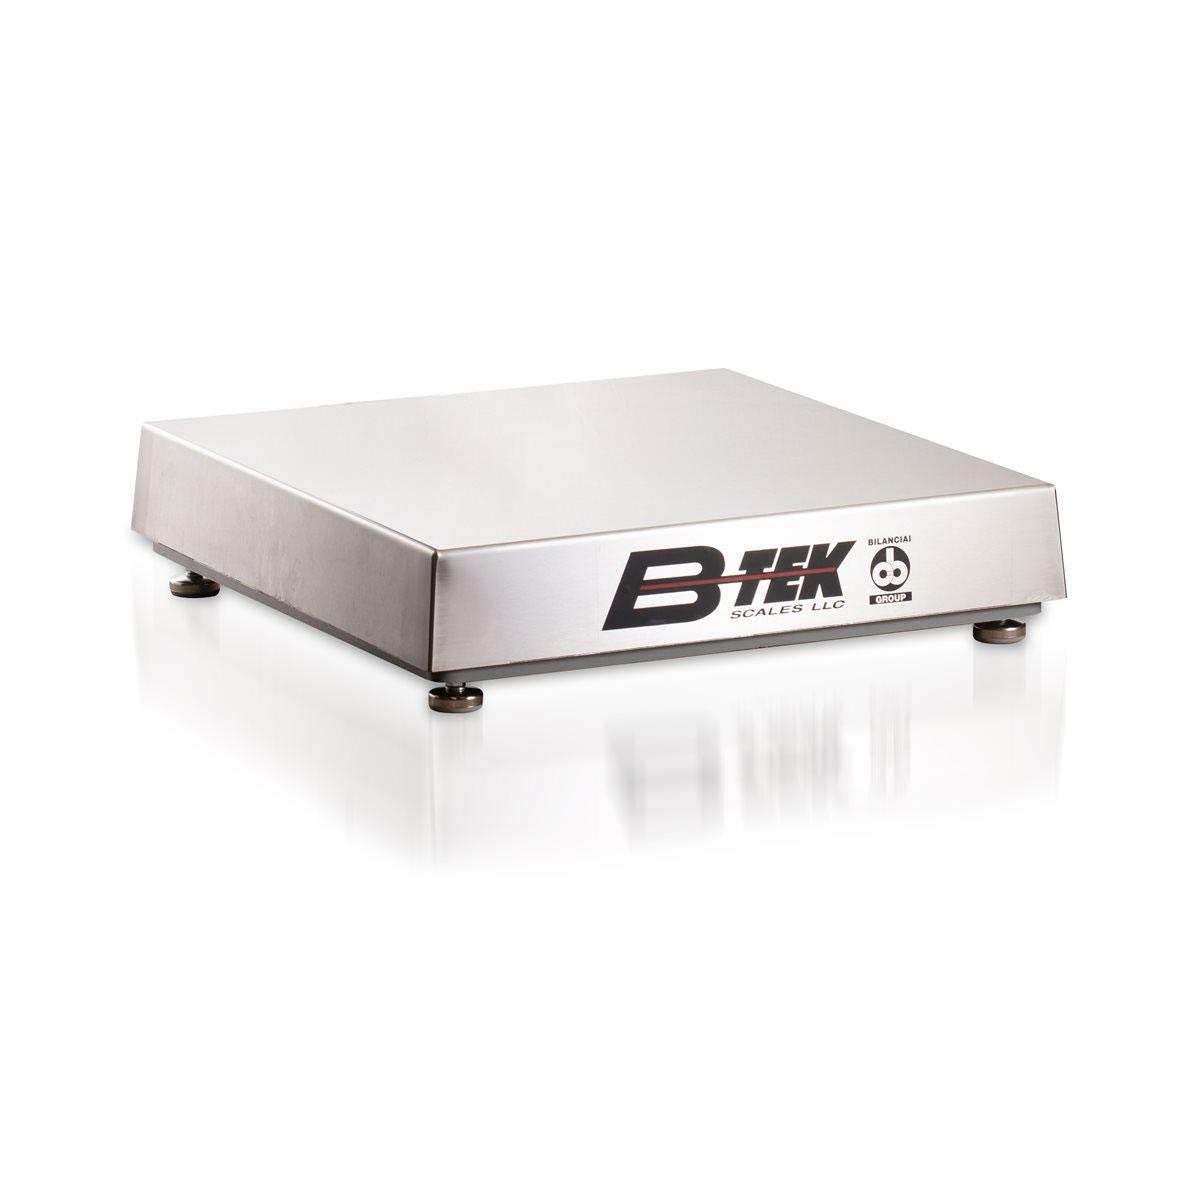 https://www.b-tek.com/images/products/Platform_Scales/Bench_Scales/912-1001_1_full.jpg